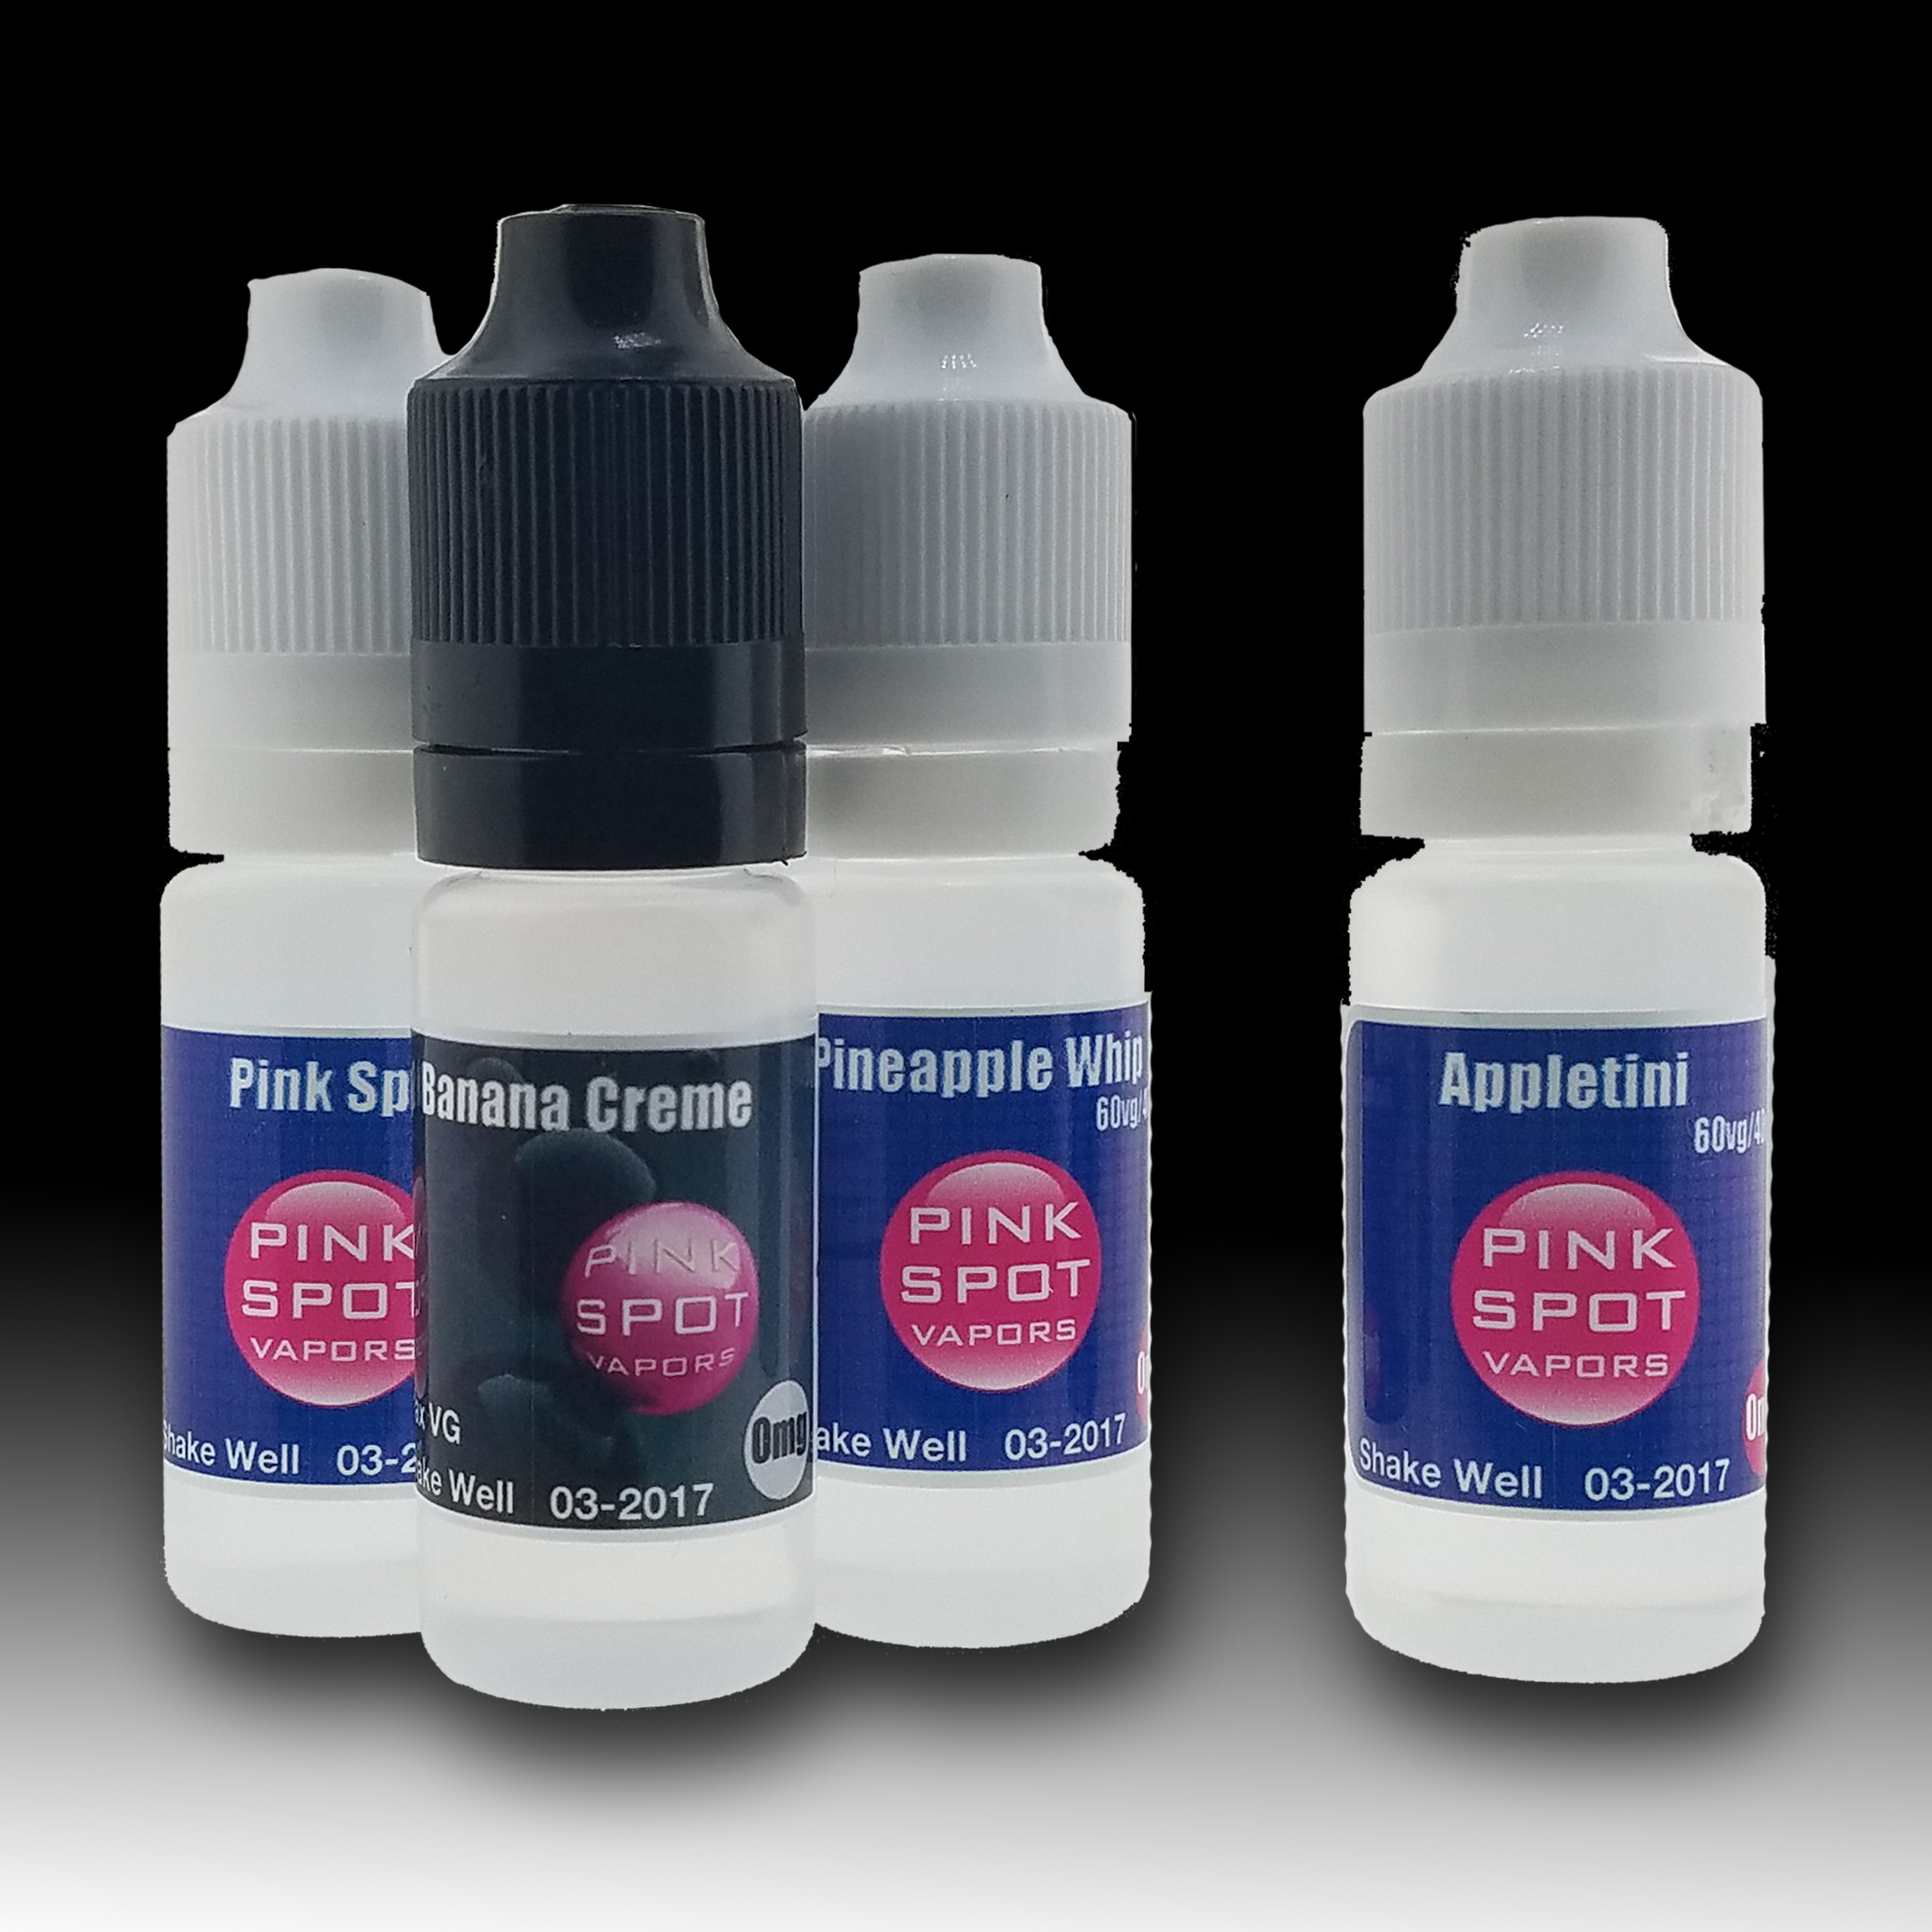 Newly Reformulated for Tobacco-Free NIC SALTS Sample 4 Pack (12ml bottles)